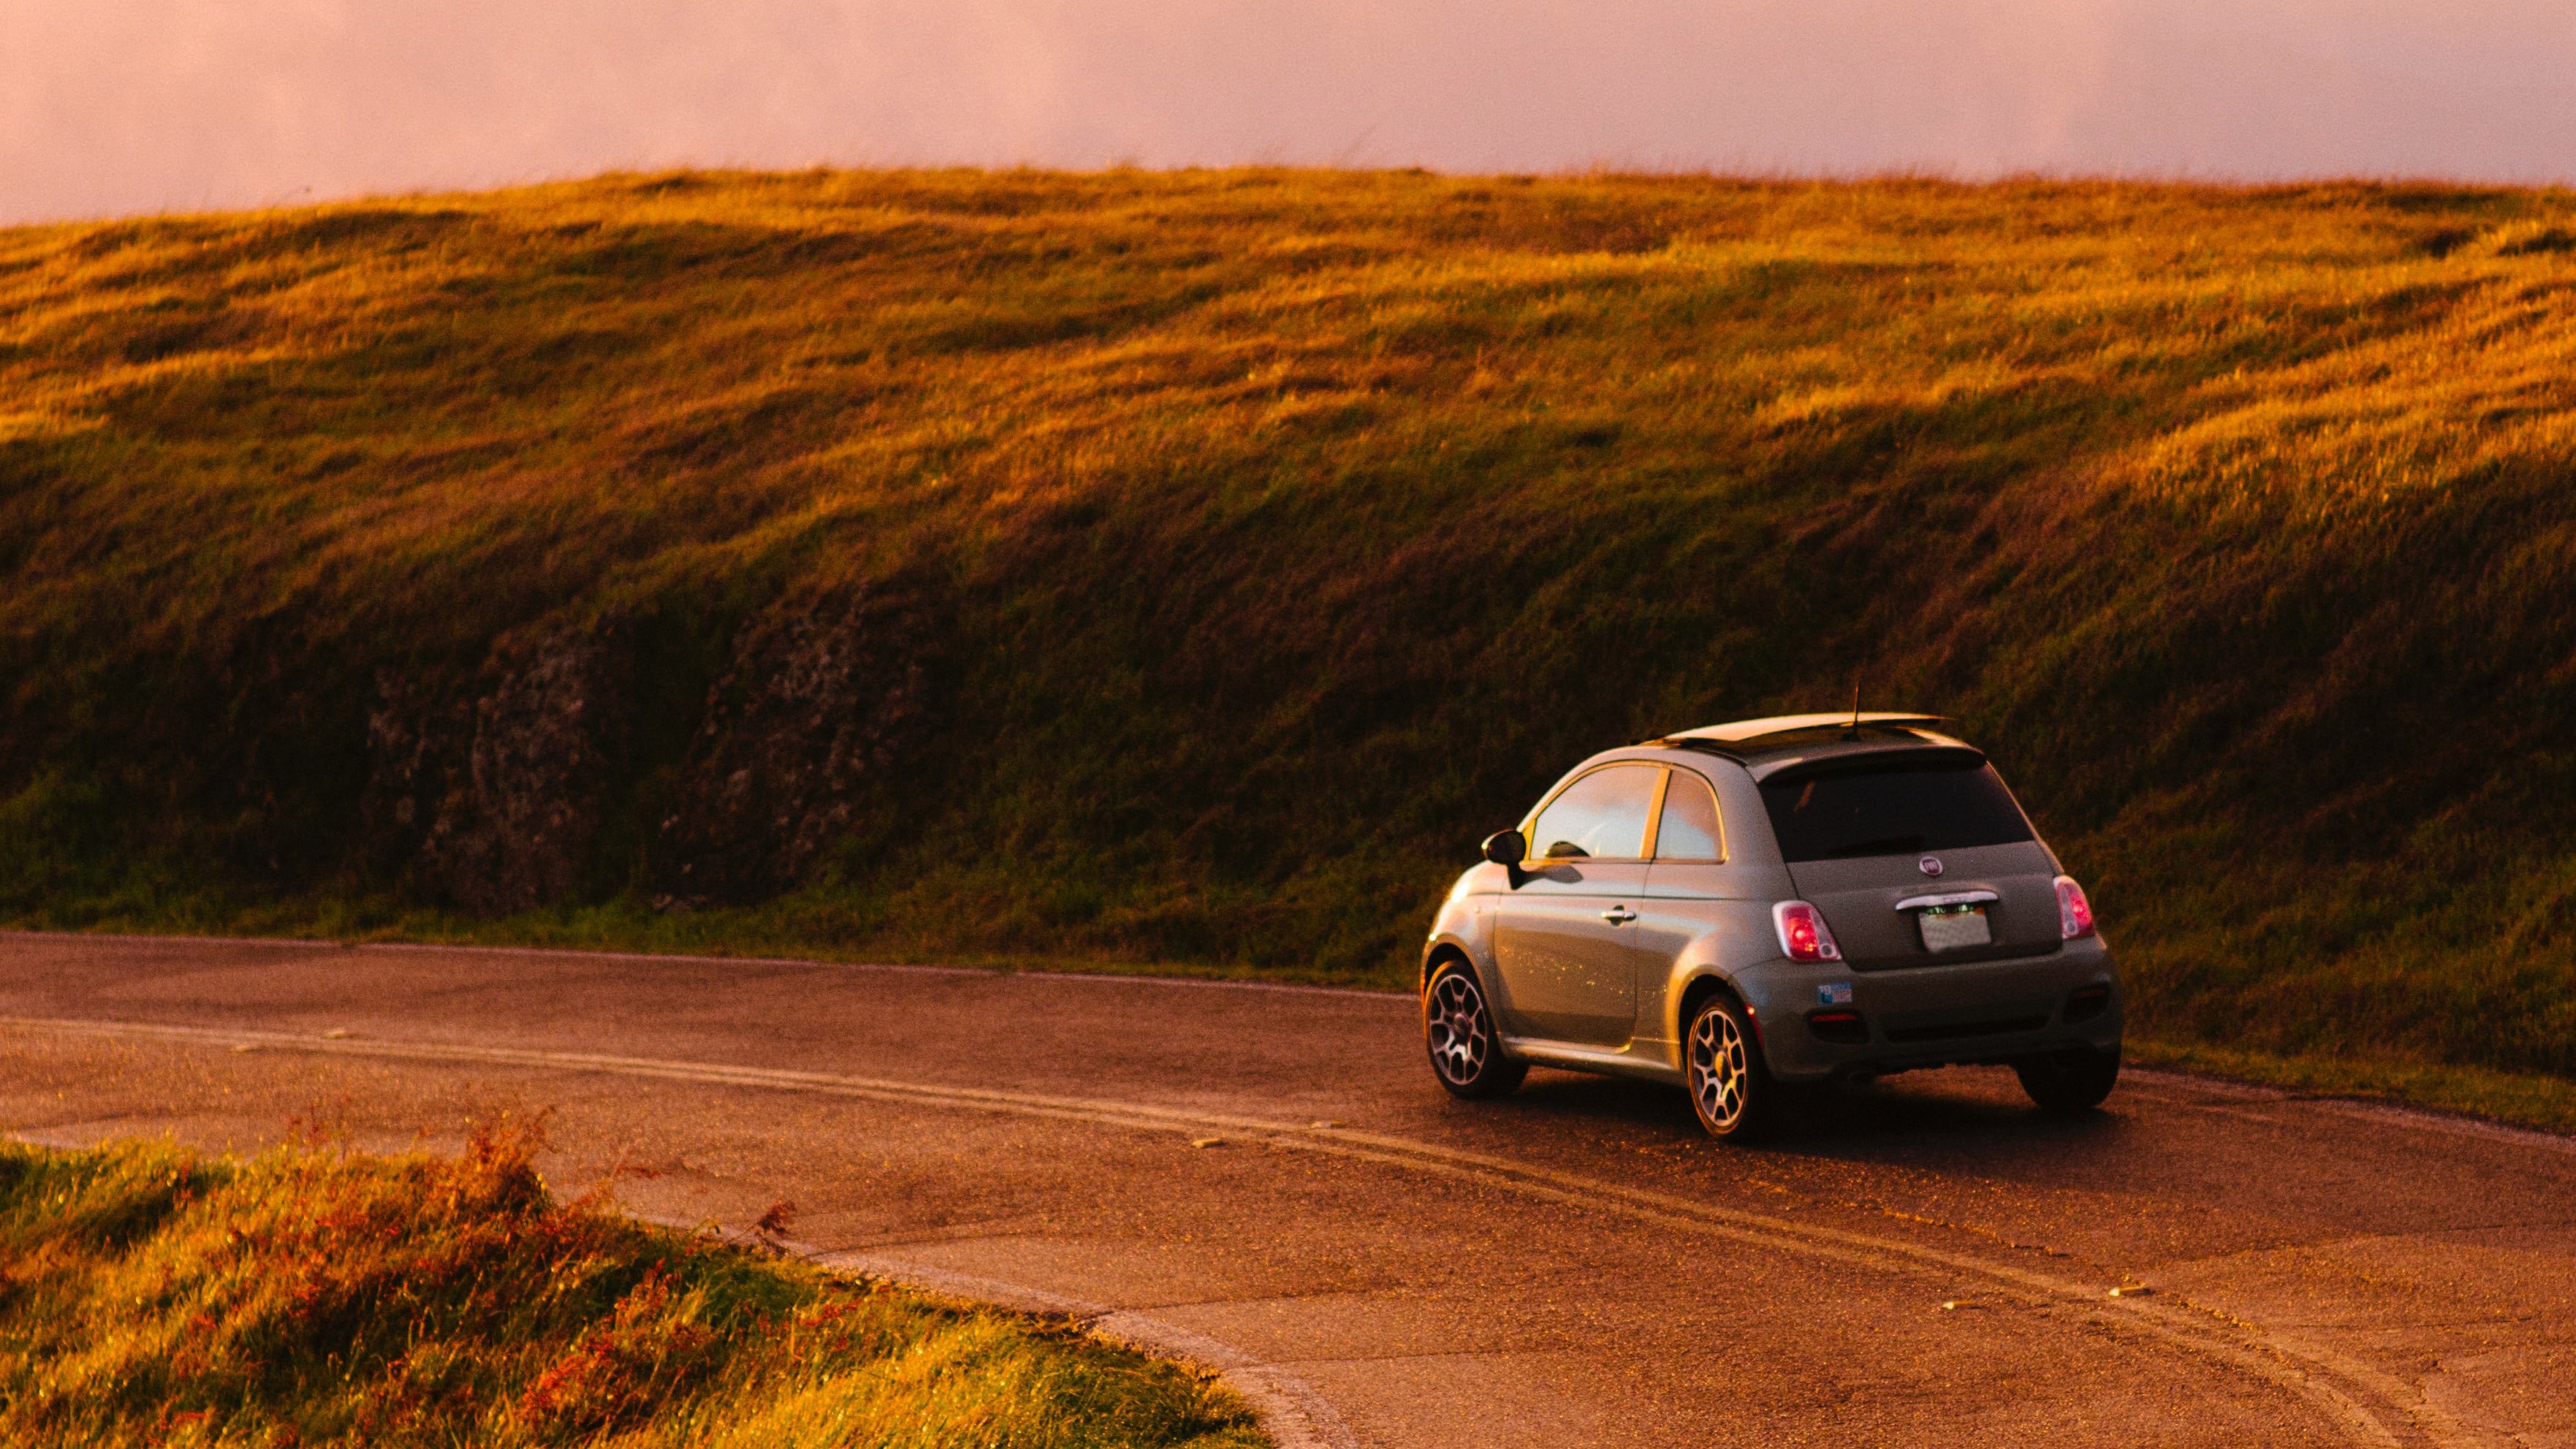 A Fiat taking a turn on a road during sunset.